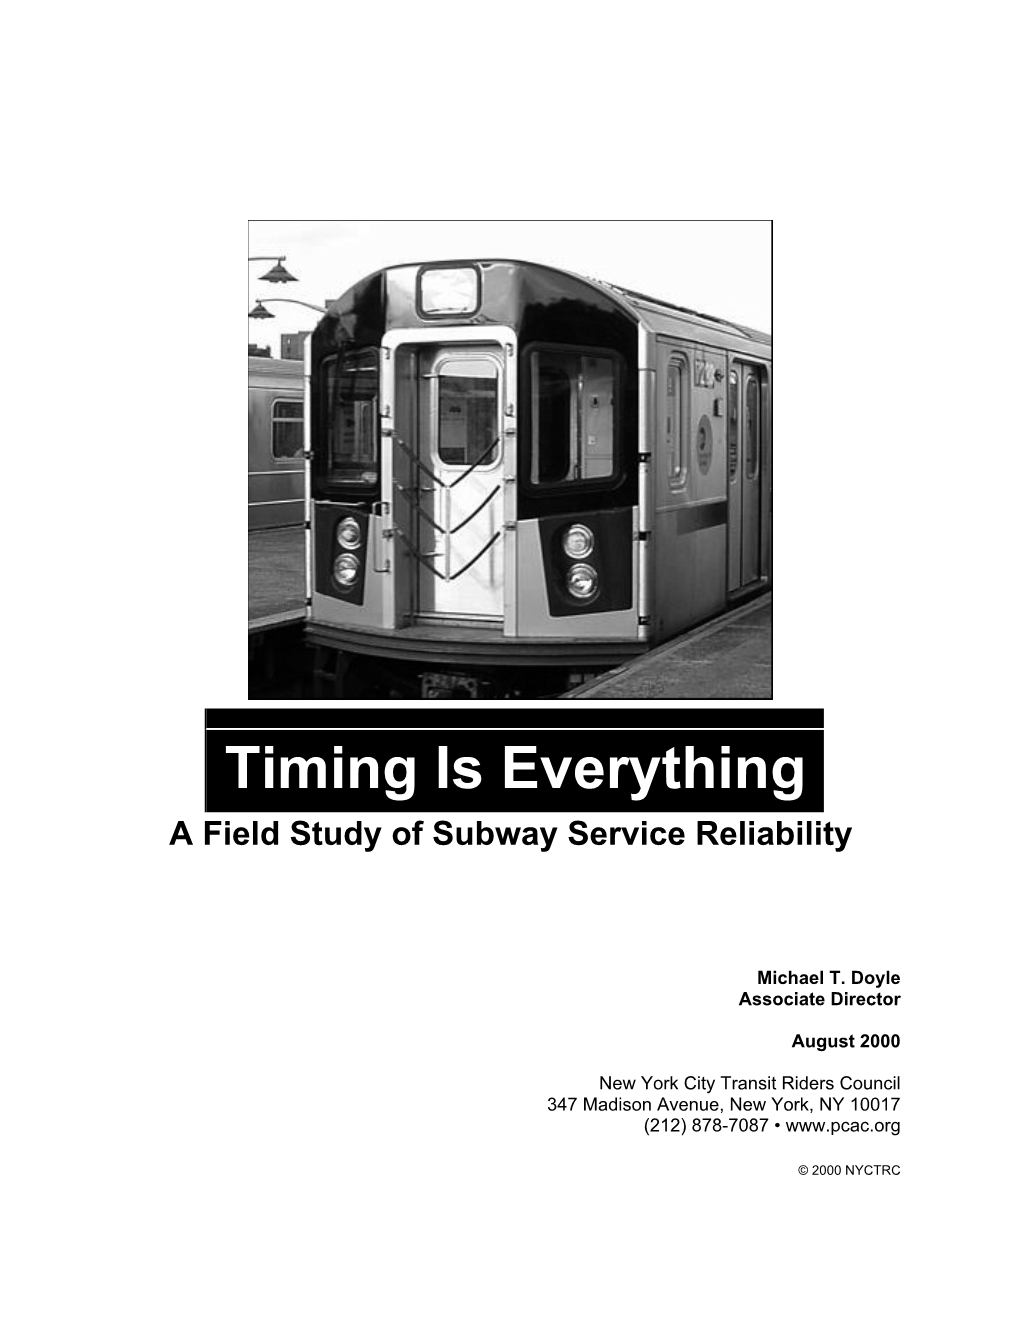 Timing Is Everything: a Field Study of Subway Reliability